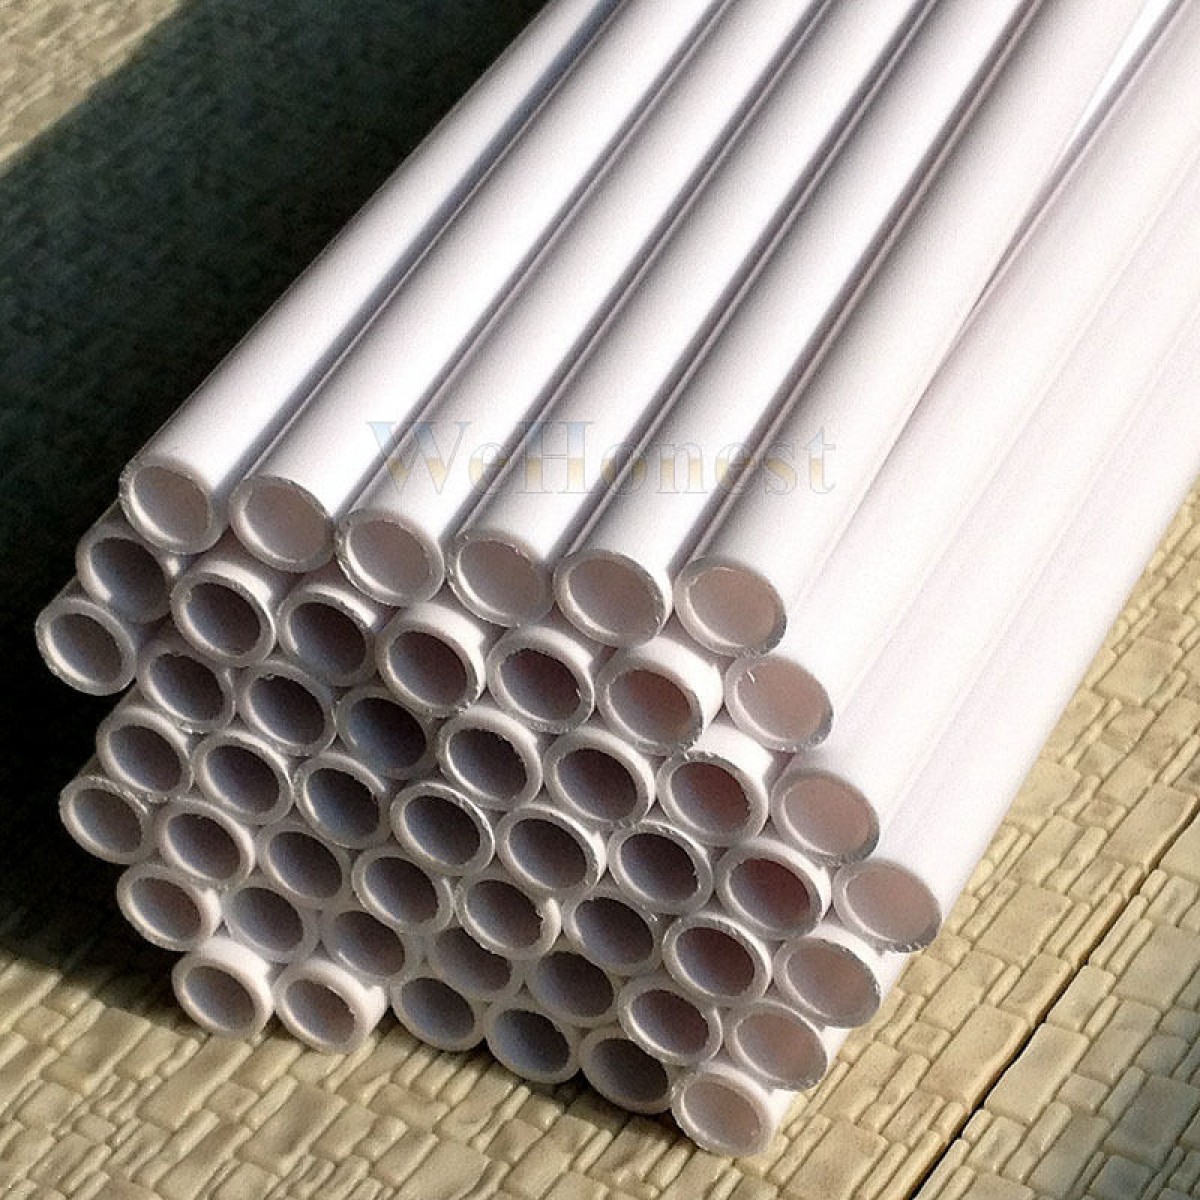 50 pcs Dia. 8mm Styrene ABS pole, Pipes 500mm long